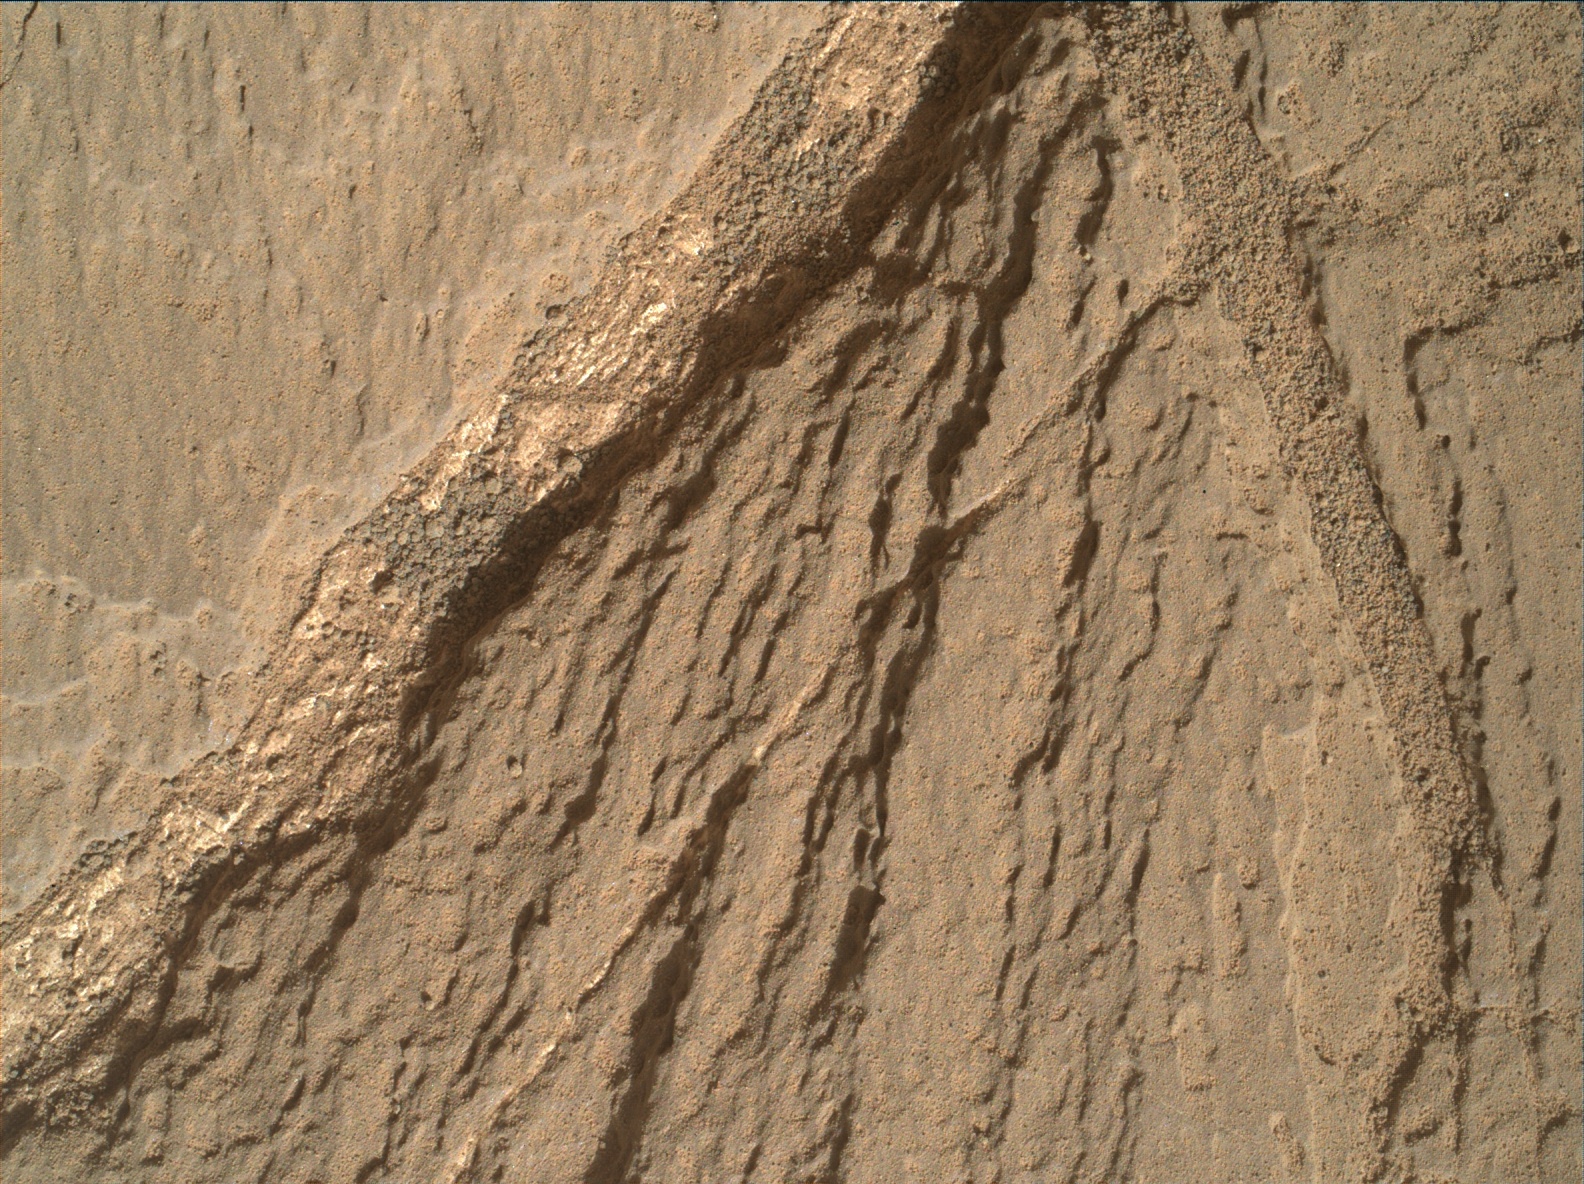 Nasa's Mars rover Curiosity acquired this image using its Mars Hand Lens Imager (MAHLI) on Sol 1167